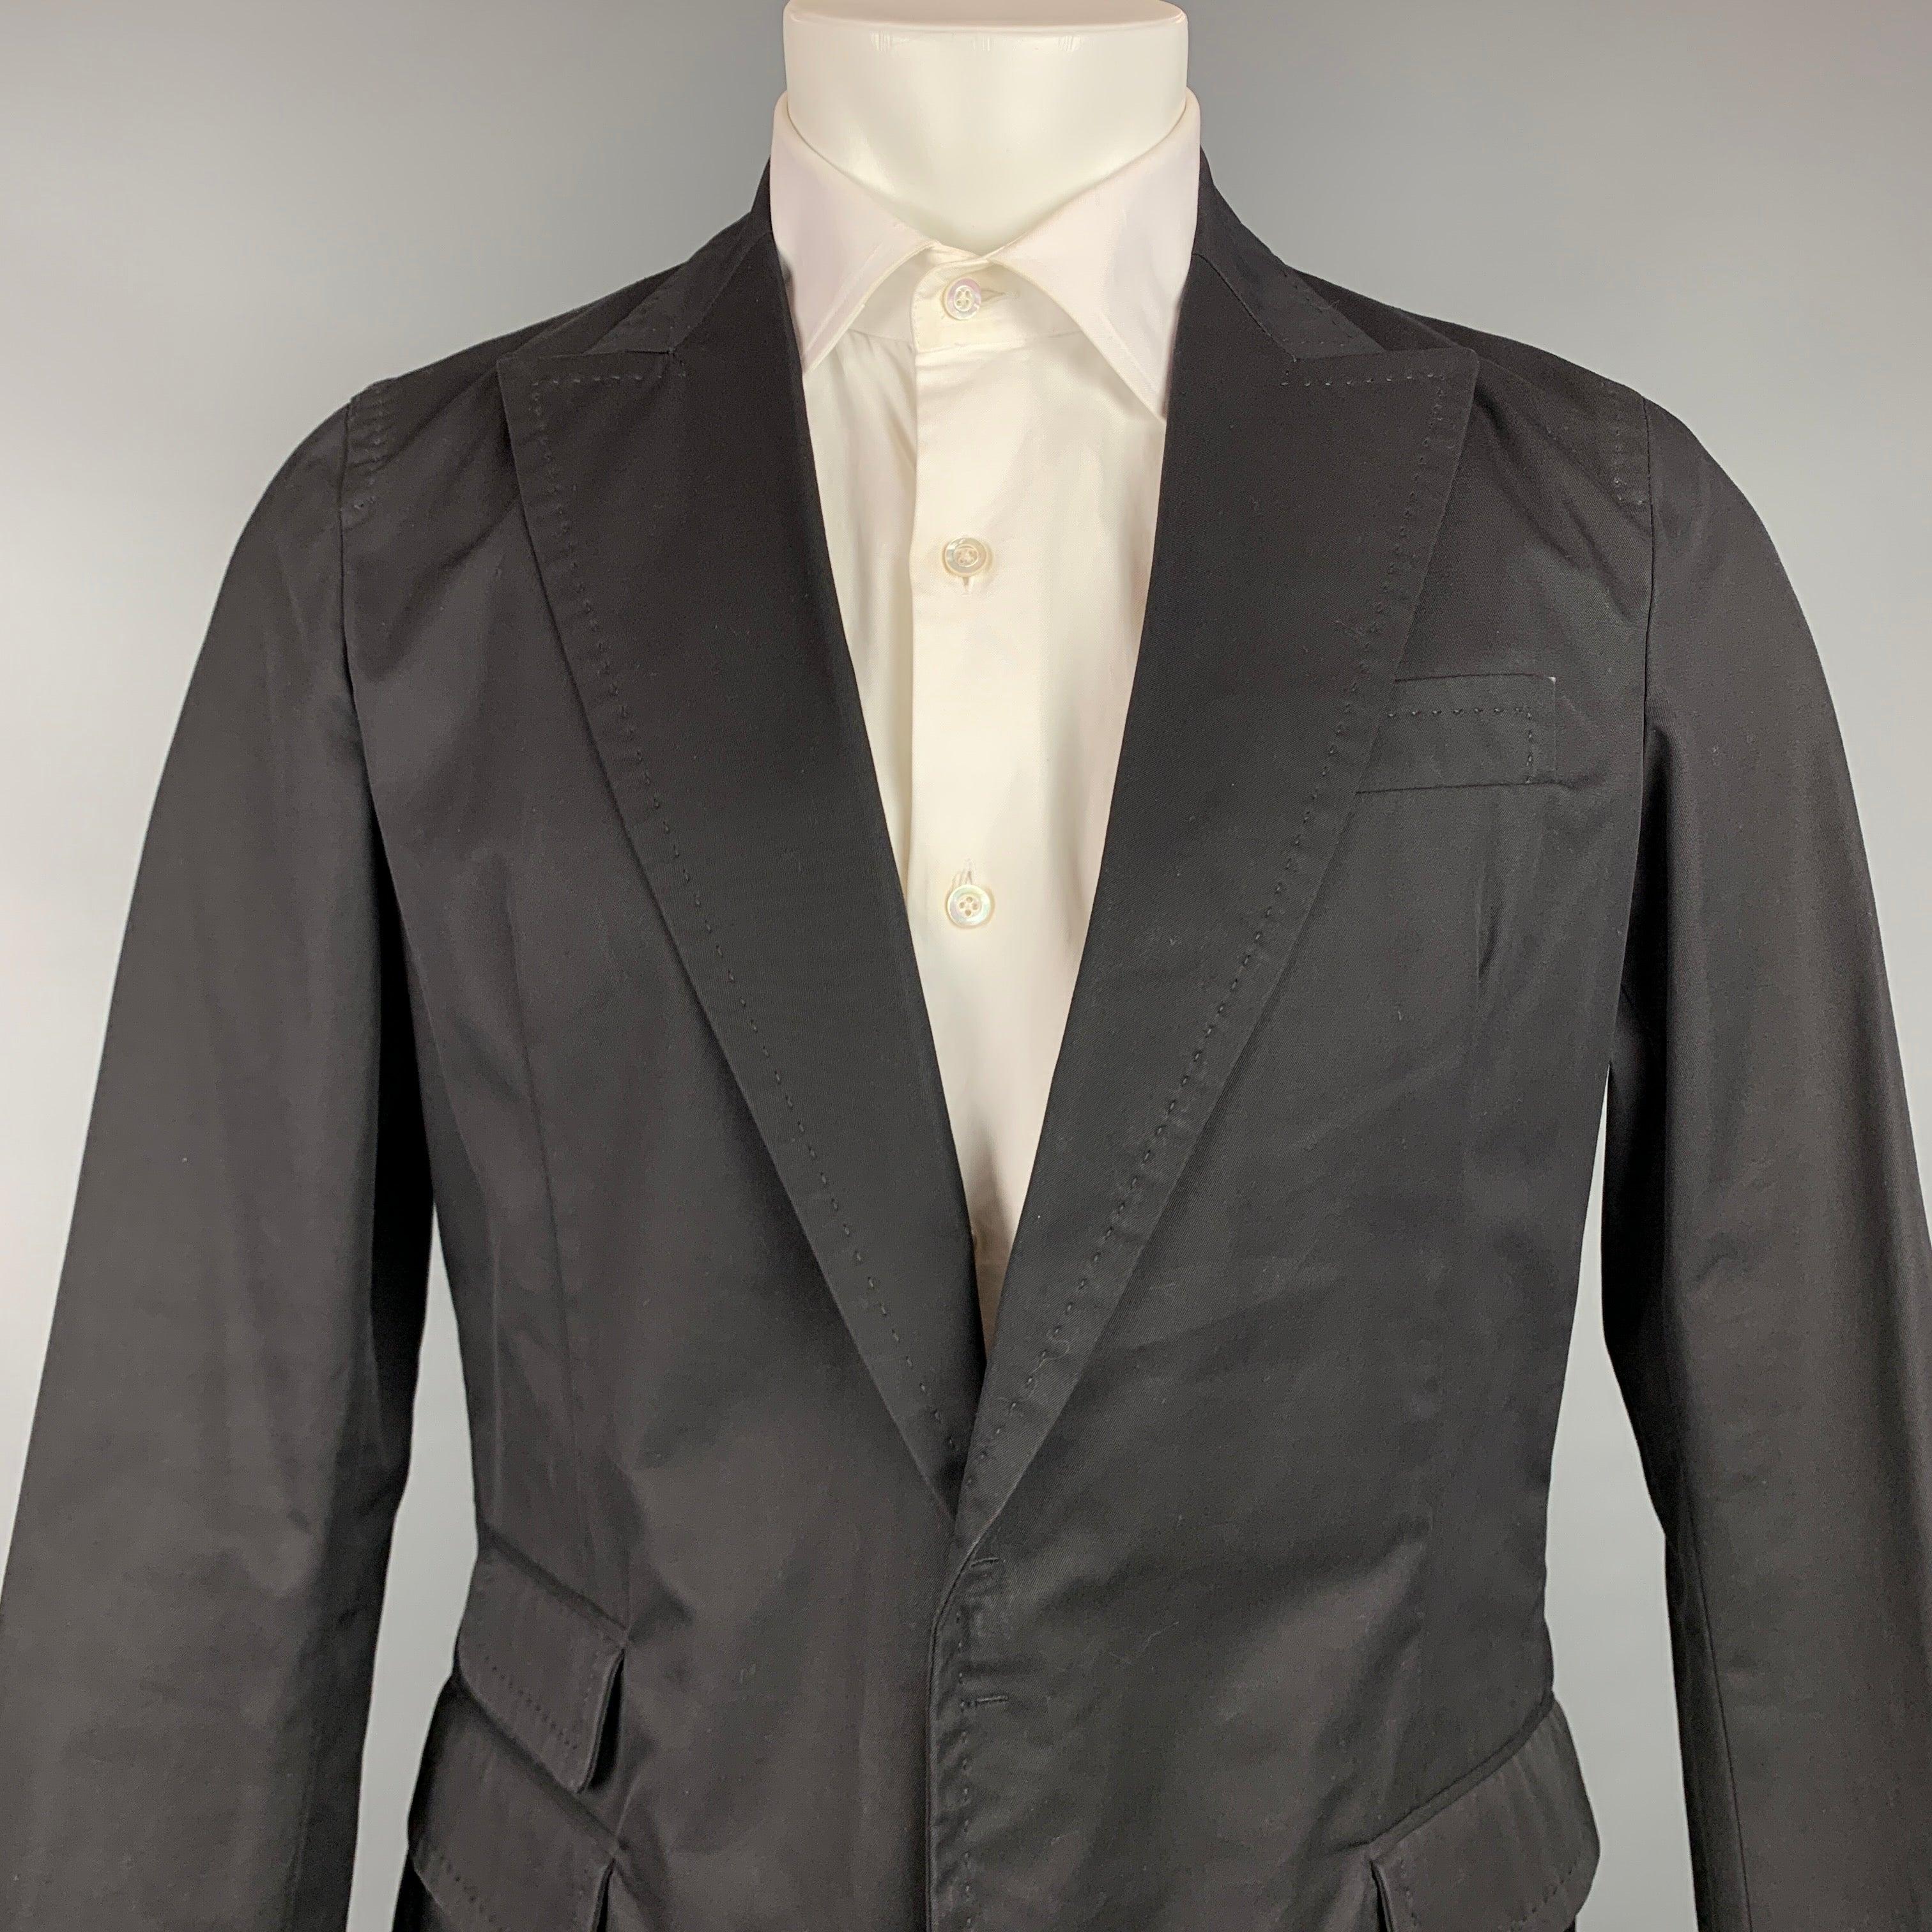 DSQUARED2
sport coat comes in a black cotton with a half pink monogram liner featuring a peak lapel, flap pockets, and a hook & eye closure. Made in Italy.Very Good Pre-Owned Condition. 

Marked:   50 

Measurements: 
 
Shoulder: 16.5 inches  Chest: